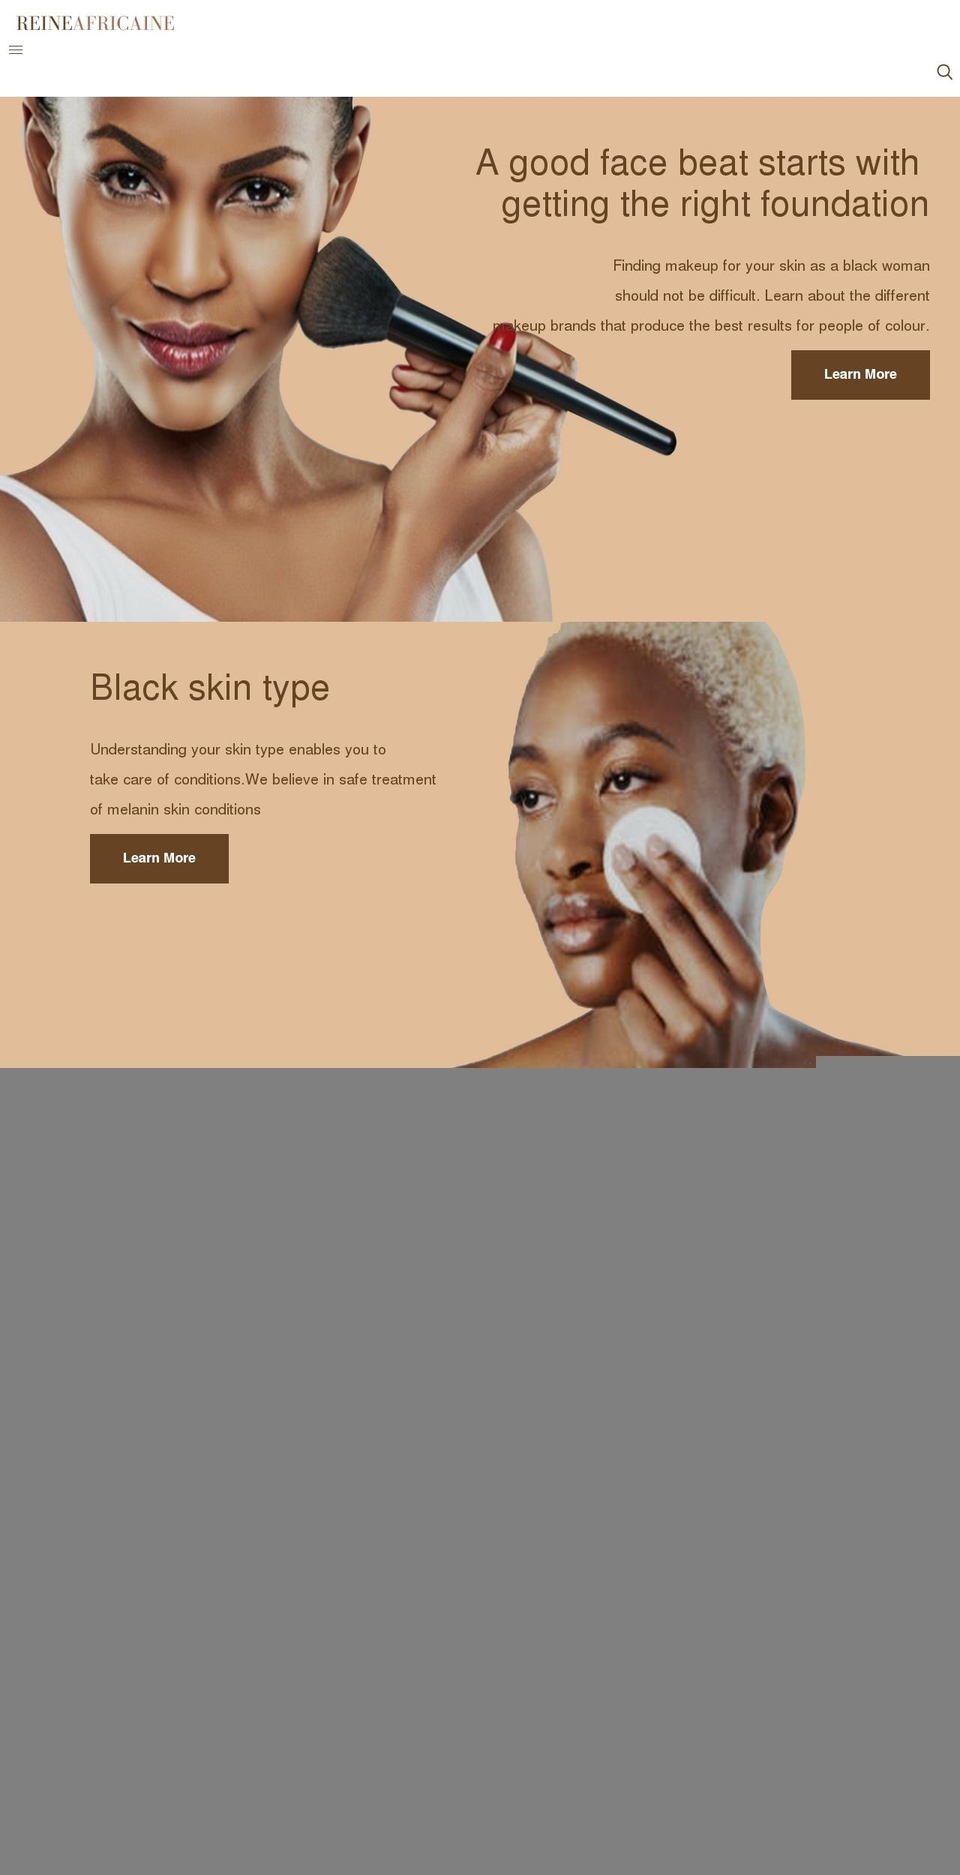 Nellie Shopify theme site example reineafricaine.com